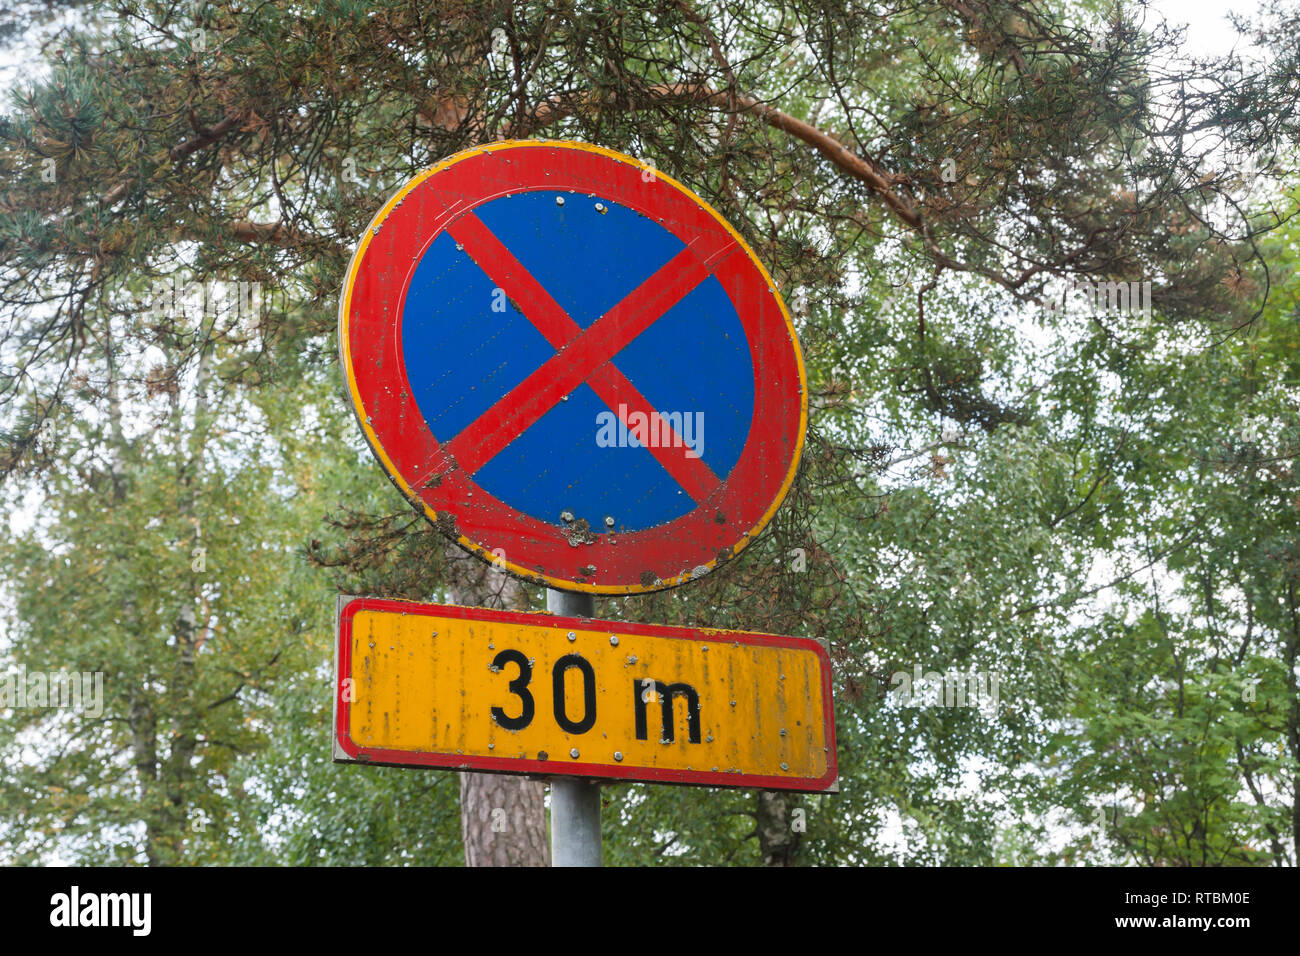 Finnish car parking road sign allowing parking for 60 minutes